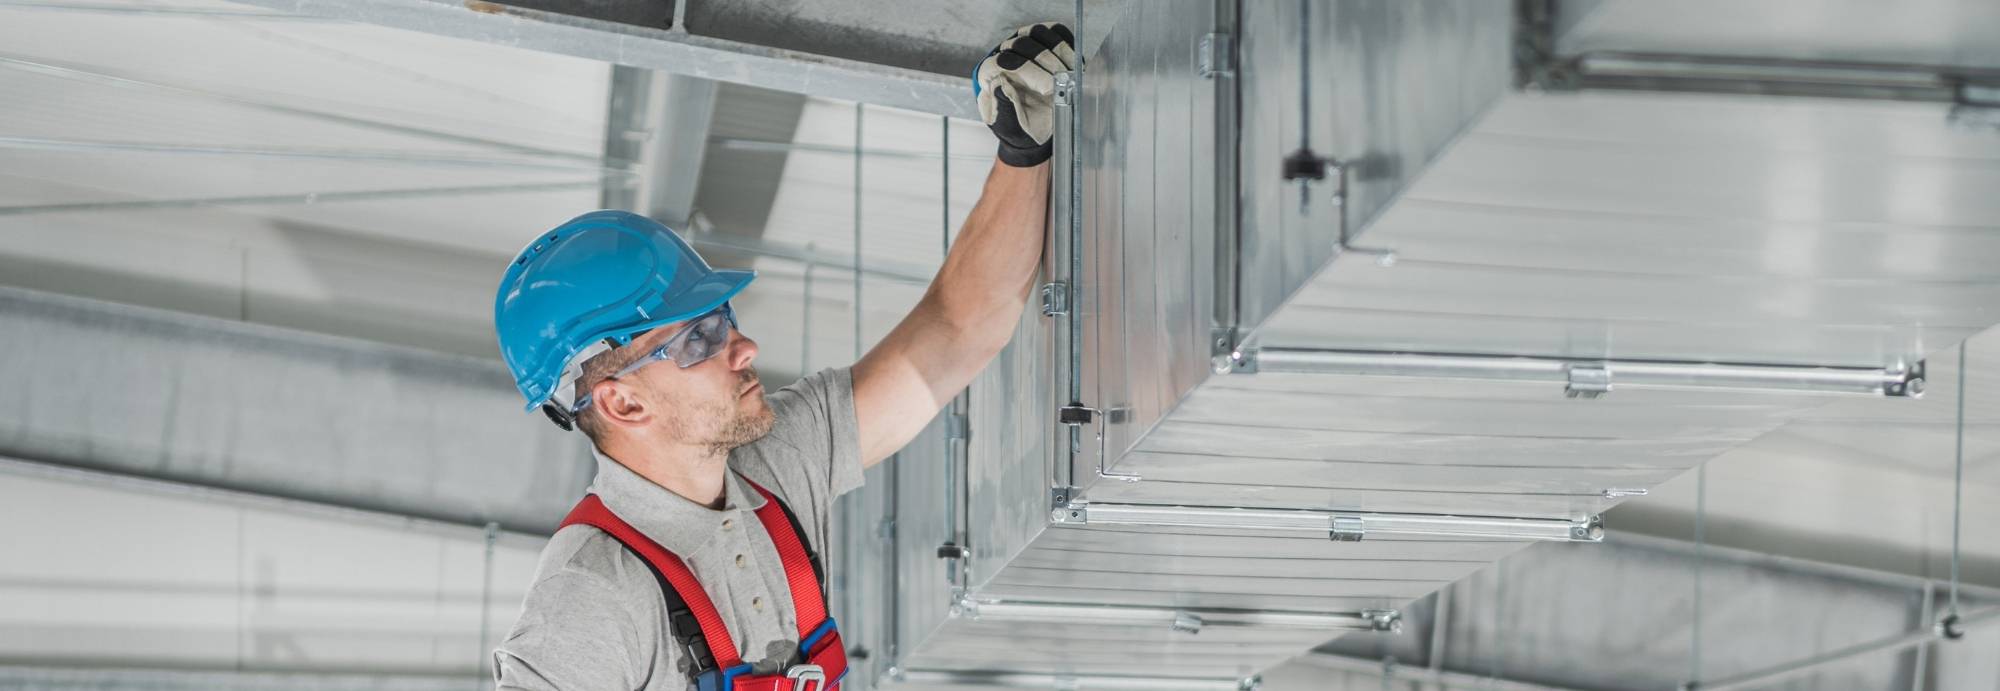 3 Reasons to Use Air-rite for Your Commercial Air Conditioning Requirements  